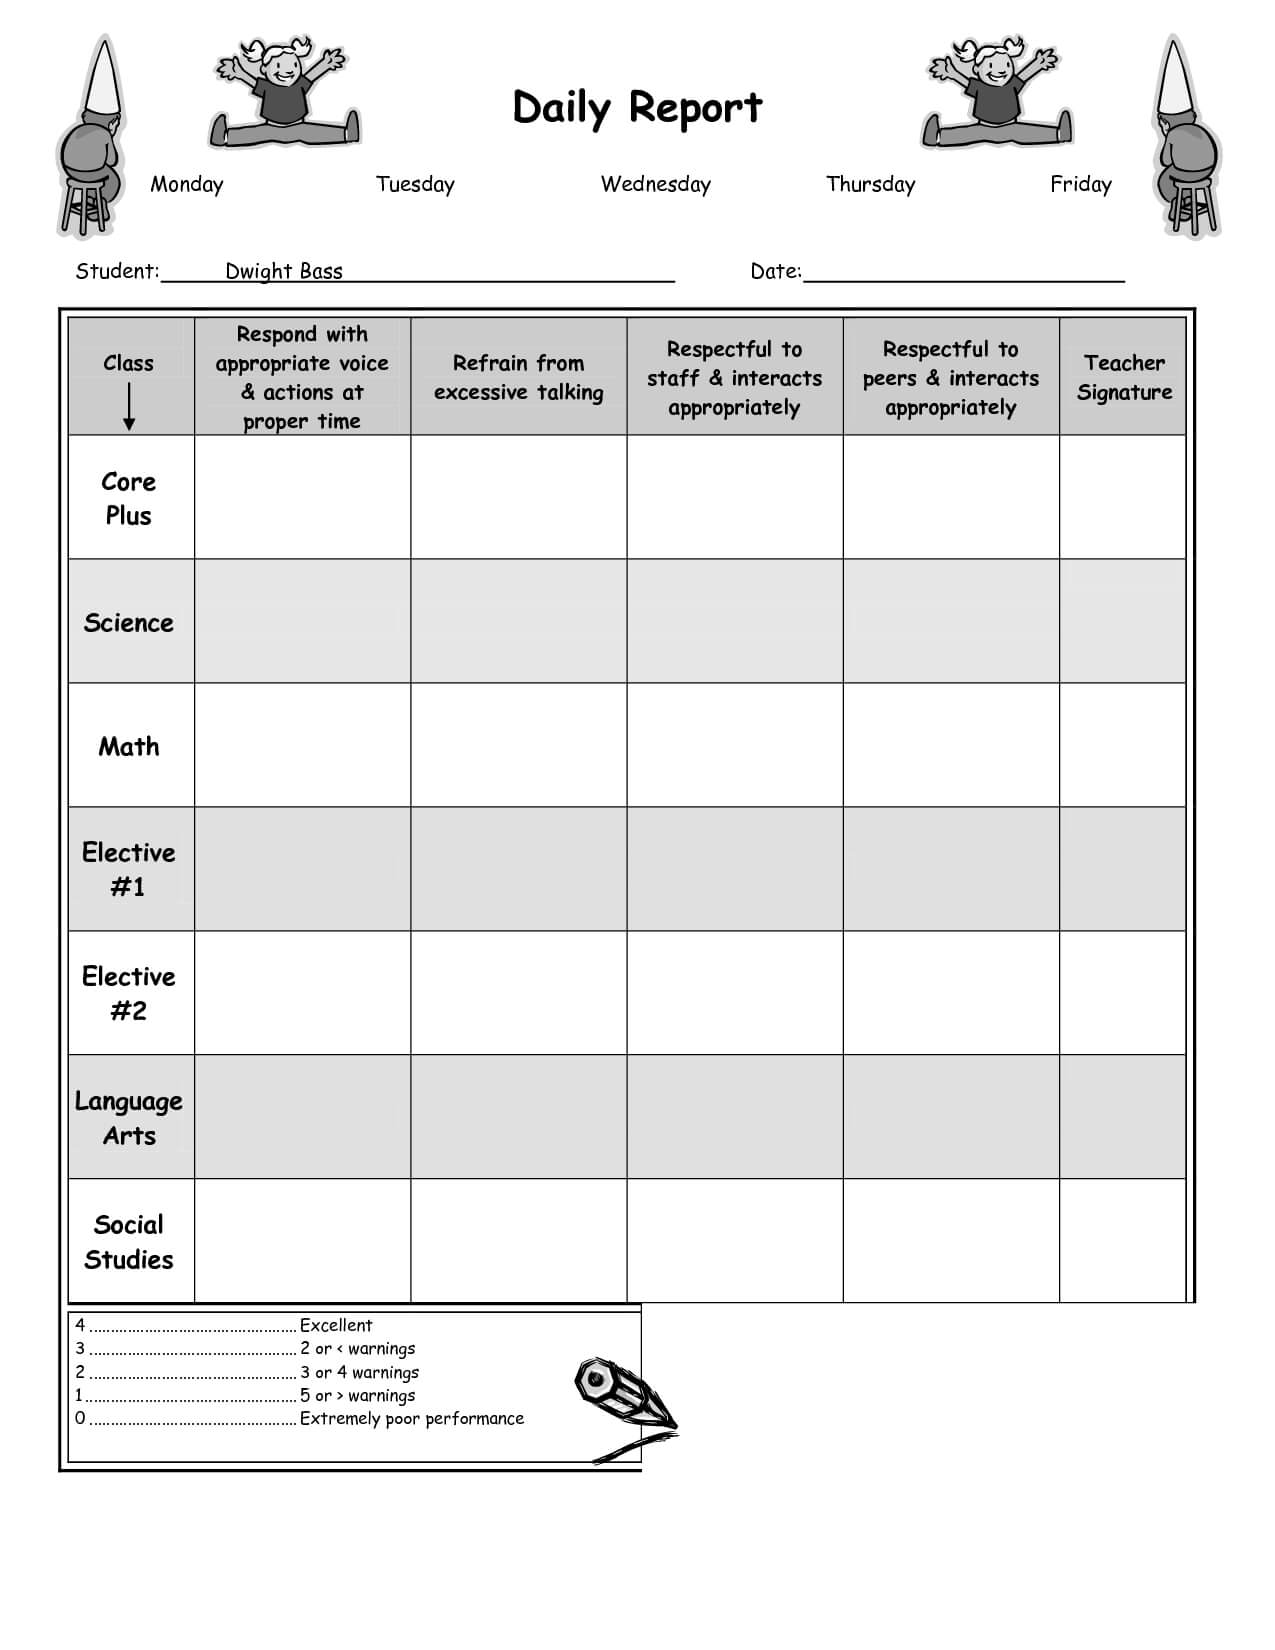 Daily Report Card Template For Adhd ] - Report Template Regarding Daily Report Card Template For Adhd